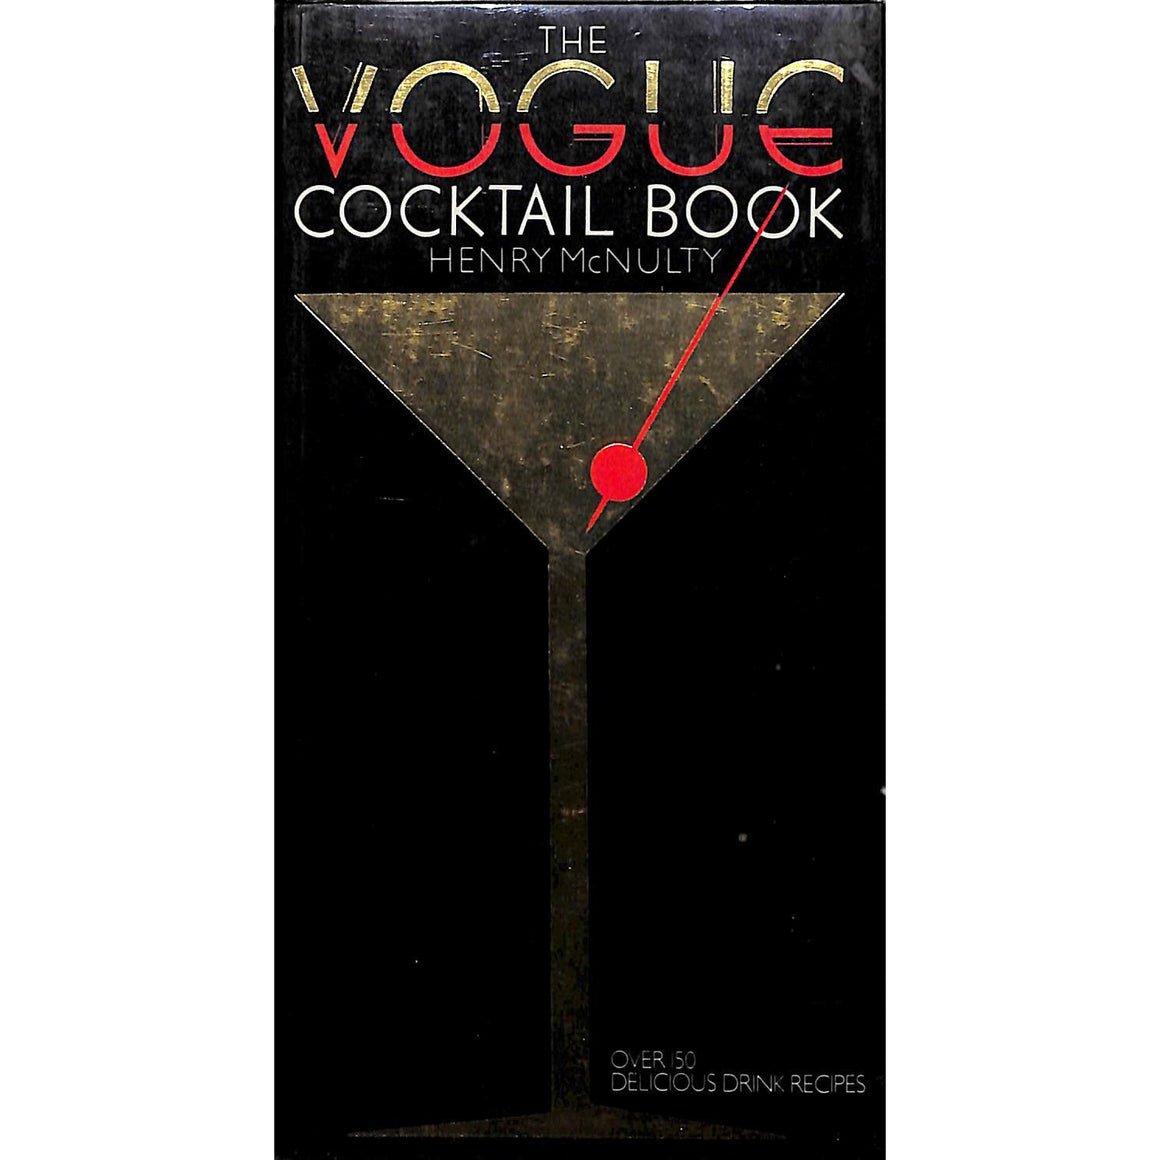 The Vogue Cocktail Book